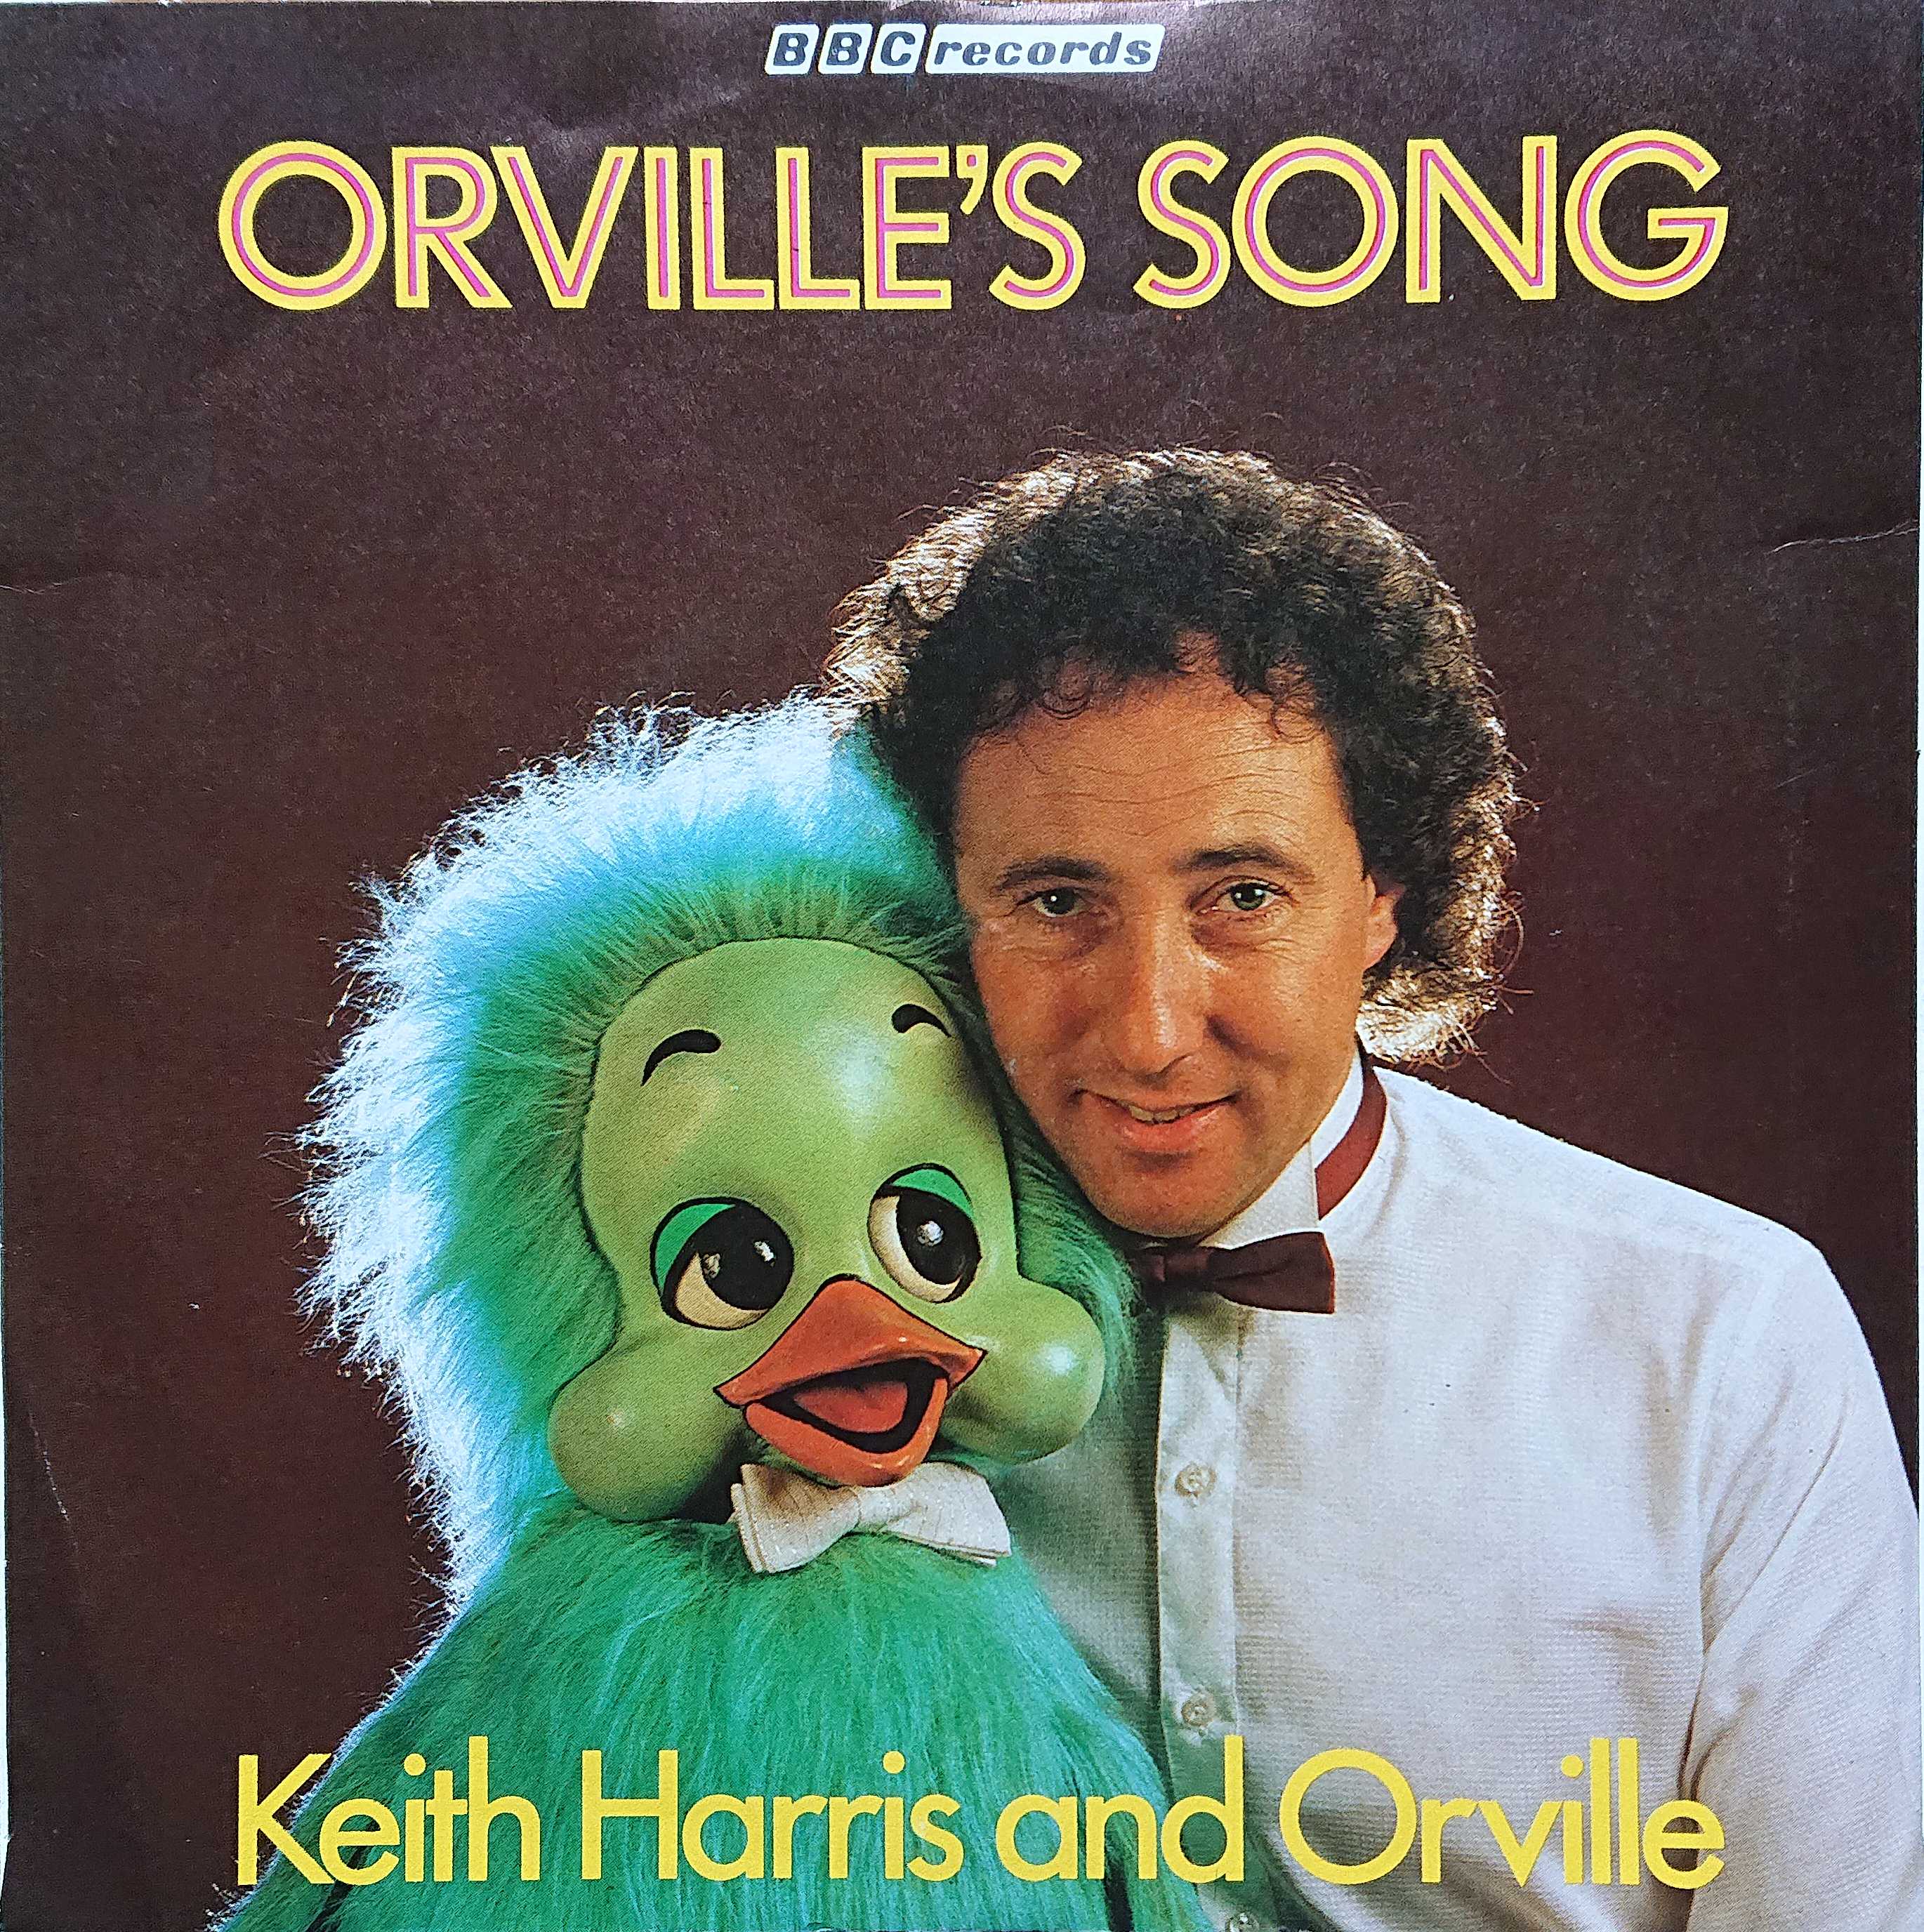 Picture of RESL 124-iD Orville's song by artist Keith Harris and Orville from the BBC records and Tapes library